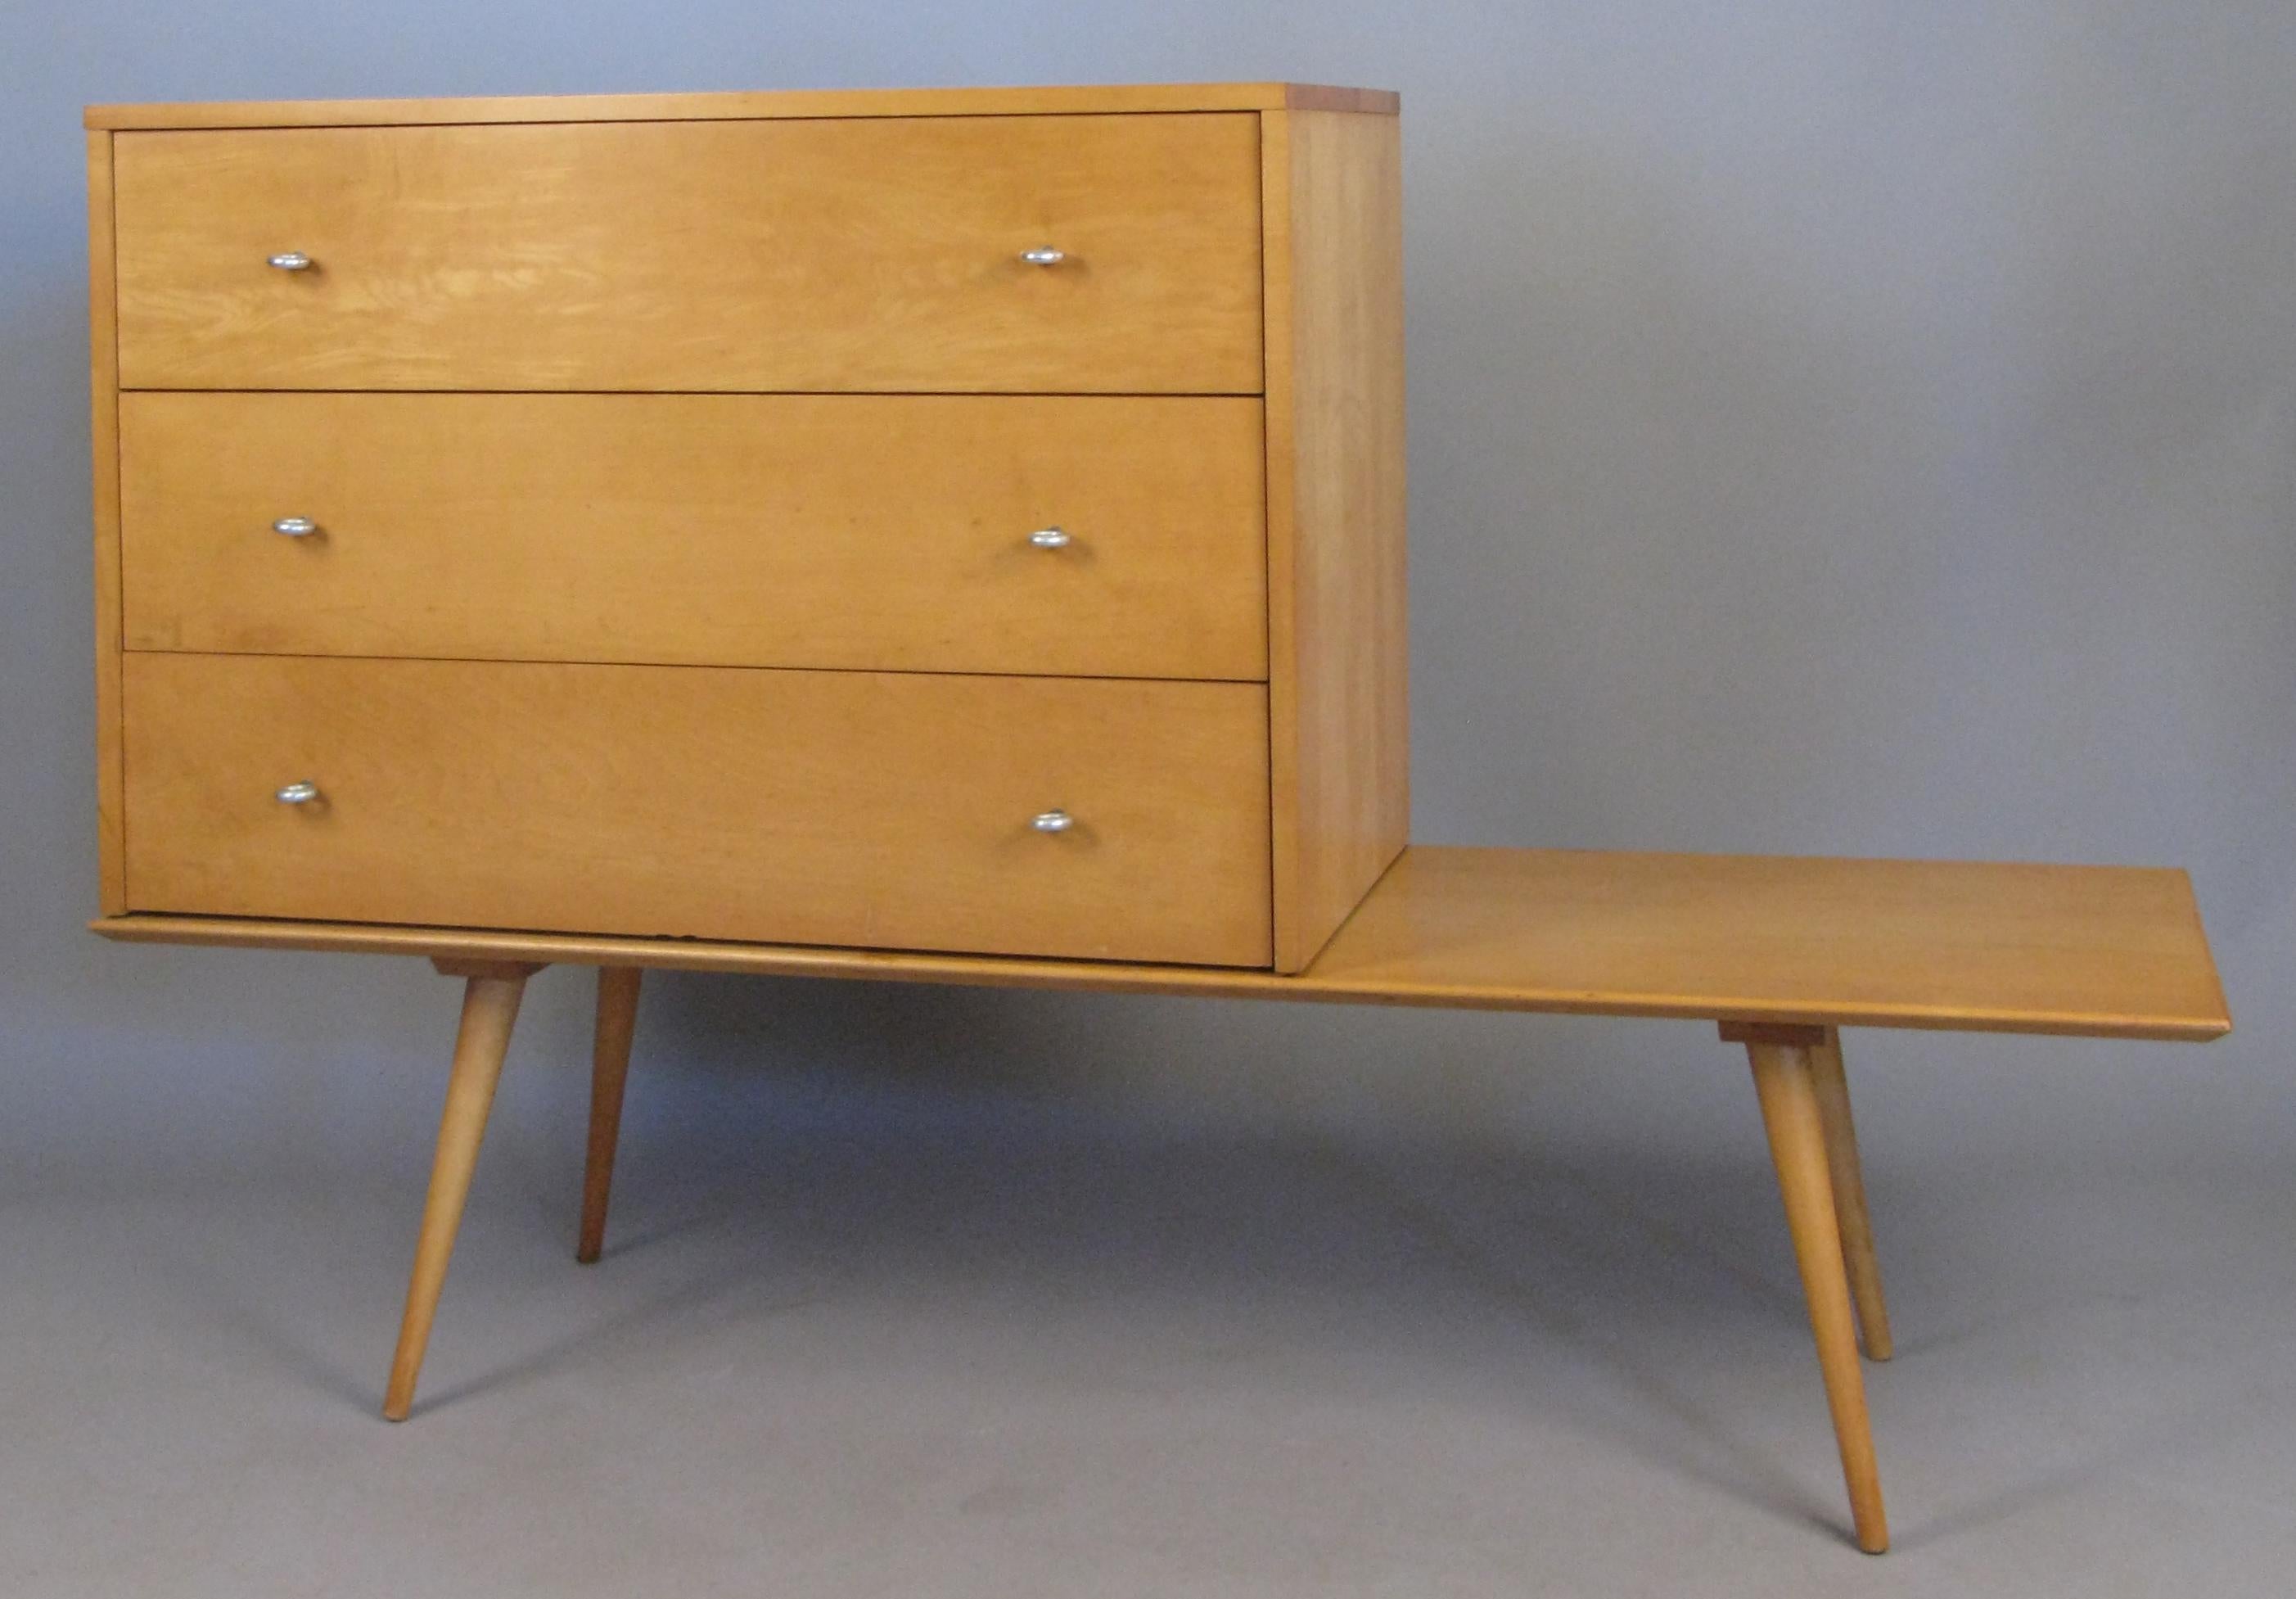 A handsome and Classic 1950s birch three drawer chest with aluminum ring pulls, which rests on a birch bench all designed by Paul McCobb for Winchendon Furniture. In original condition with age expected wear. The left side of the chest has some